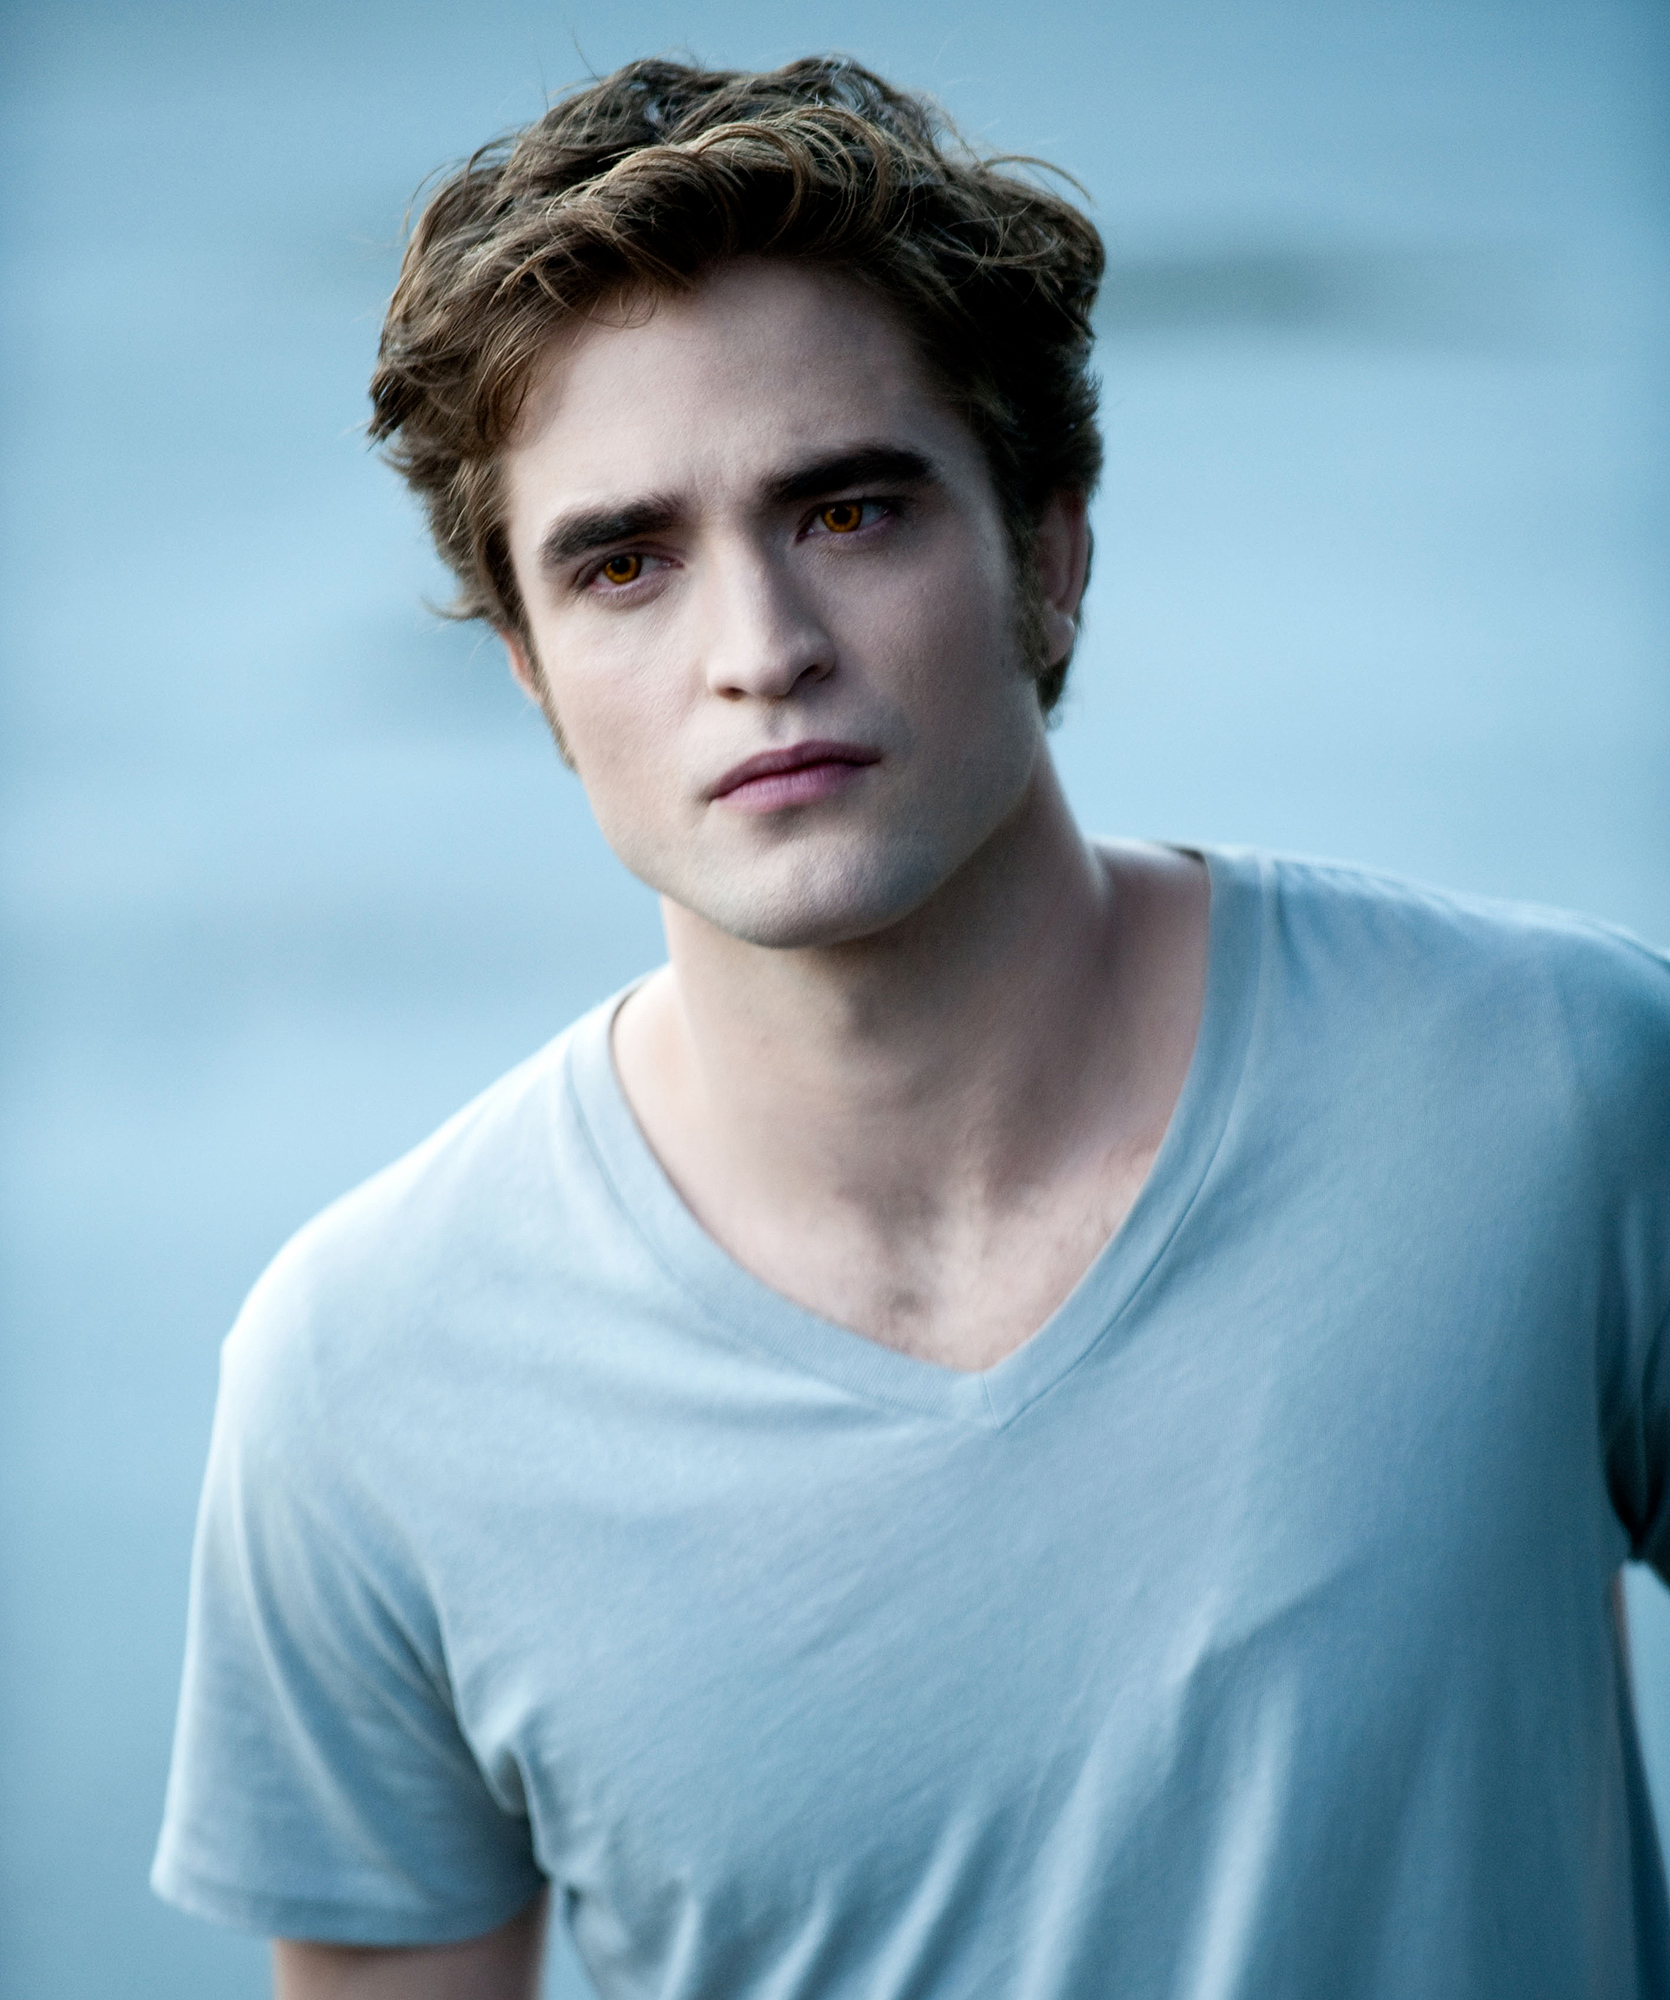 Why 'Twilight' Fans May Be 'Taken Aback' by Edward Cullen in New Book